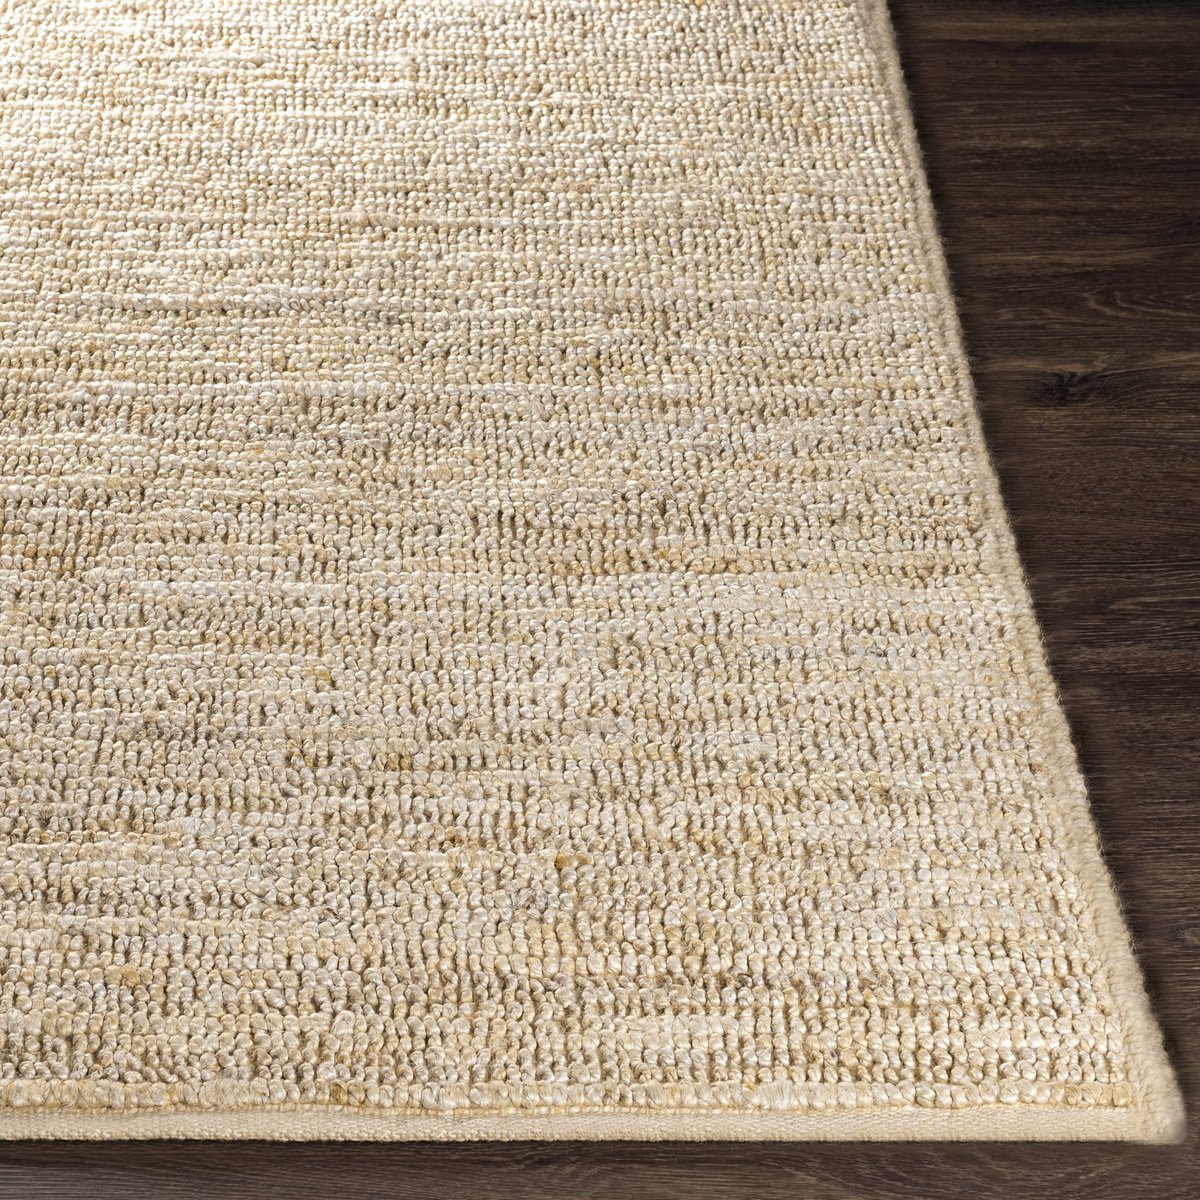 Surya Continental COT-1930 Natural Fiber Hand Woven 100% Natural Jute Antique White 8' Square Area Rug